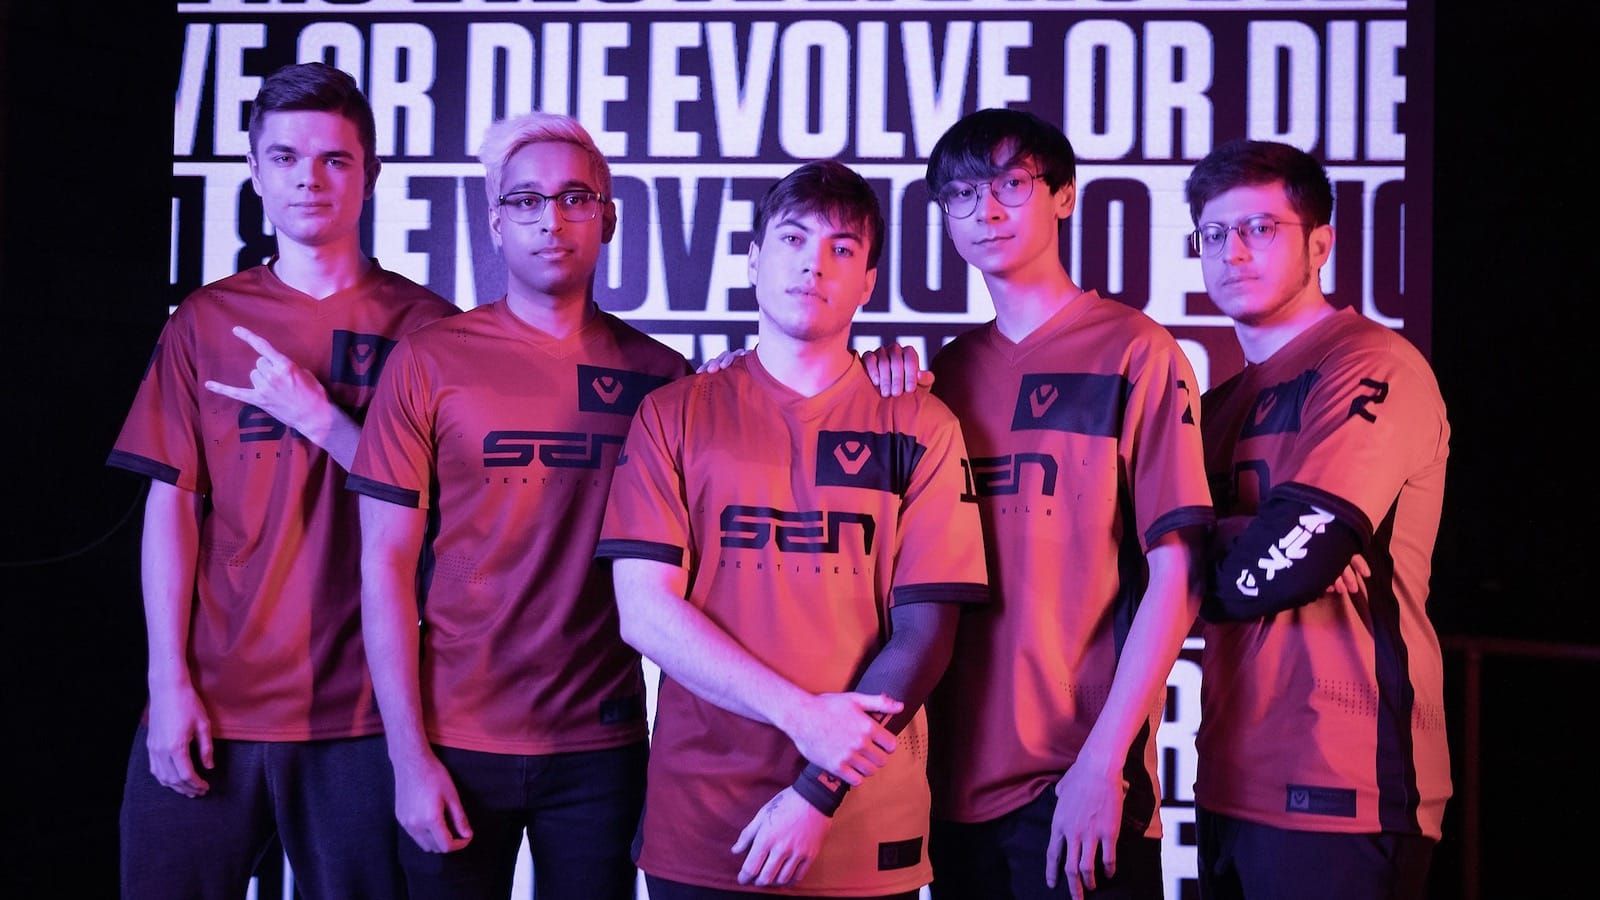 Sentinels Valorant team standing in front of background that says "Evolve or Die"